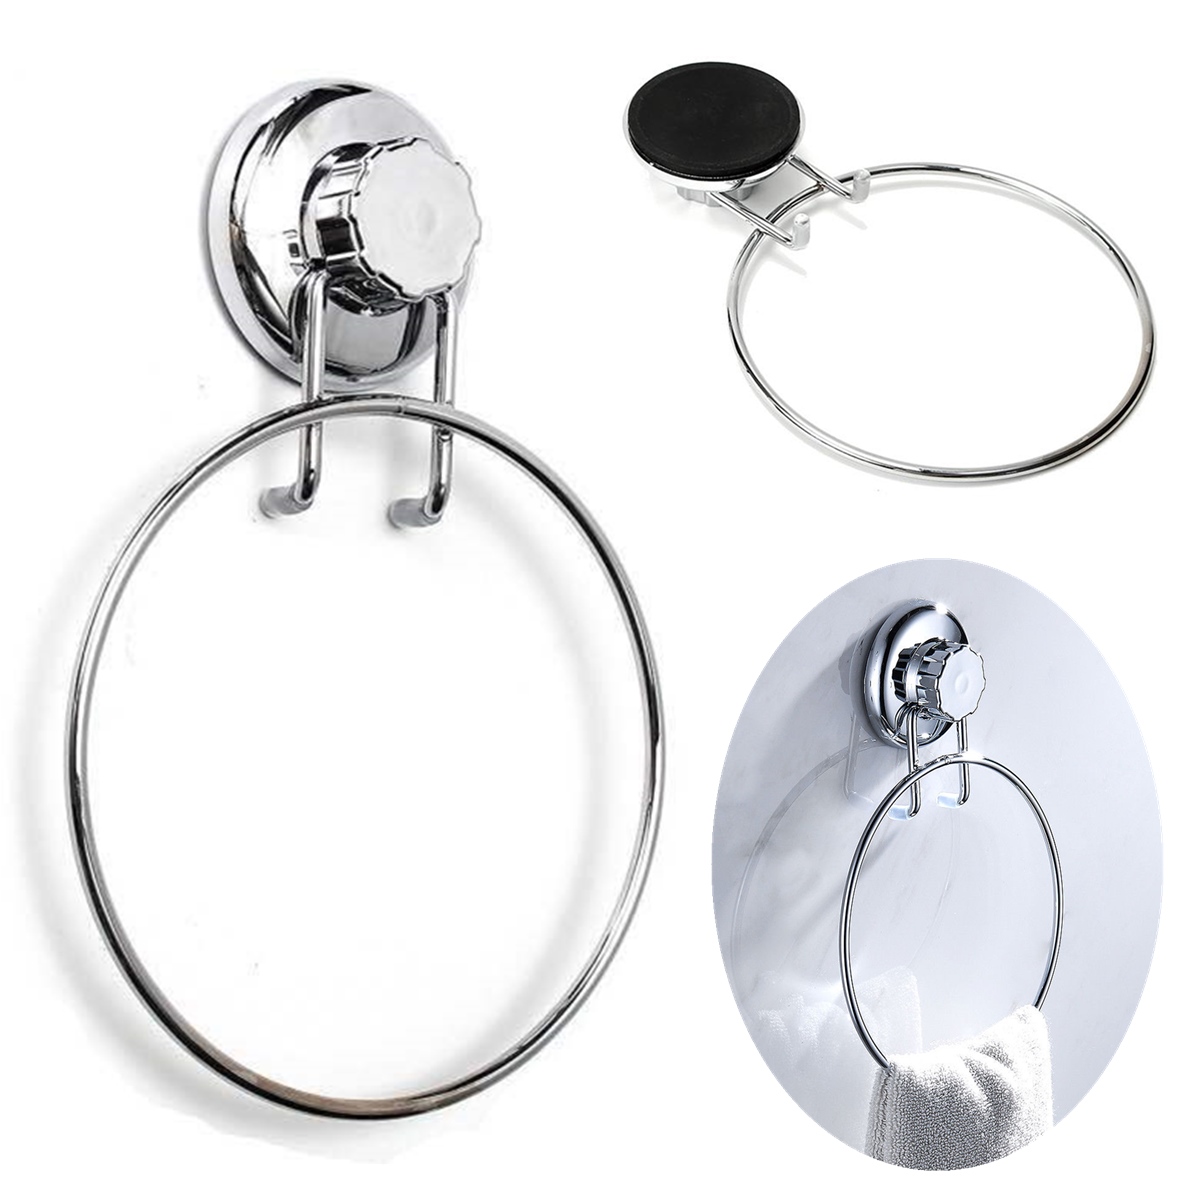 Towel-Ring-Holder-Chrome-No-Drilling-Suction-Cup-Bathroom-Kitchen-Accessory-Towel-Holder-1322963